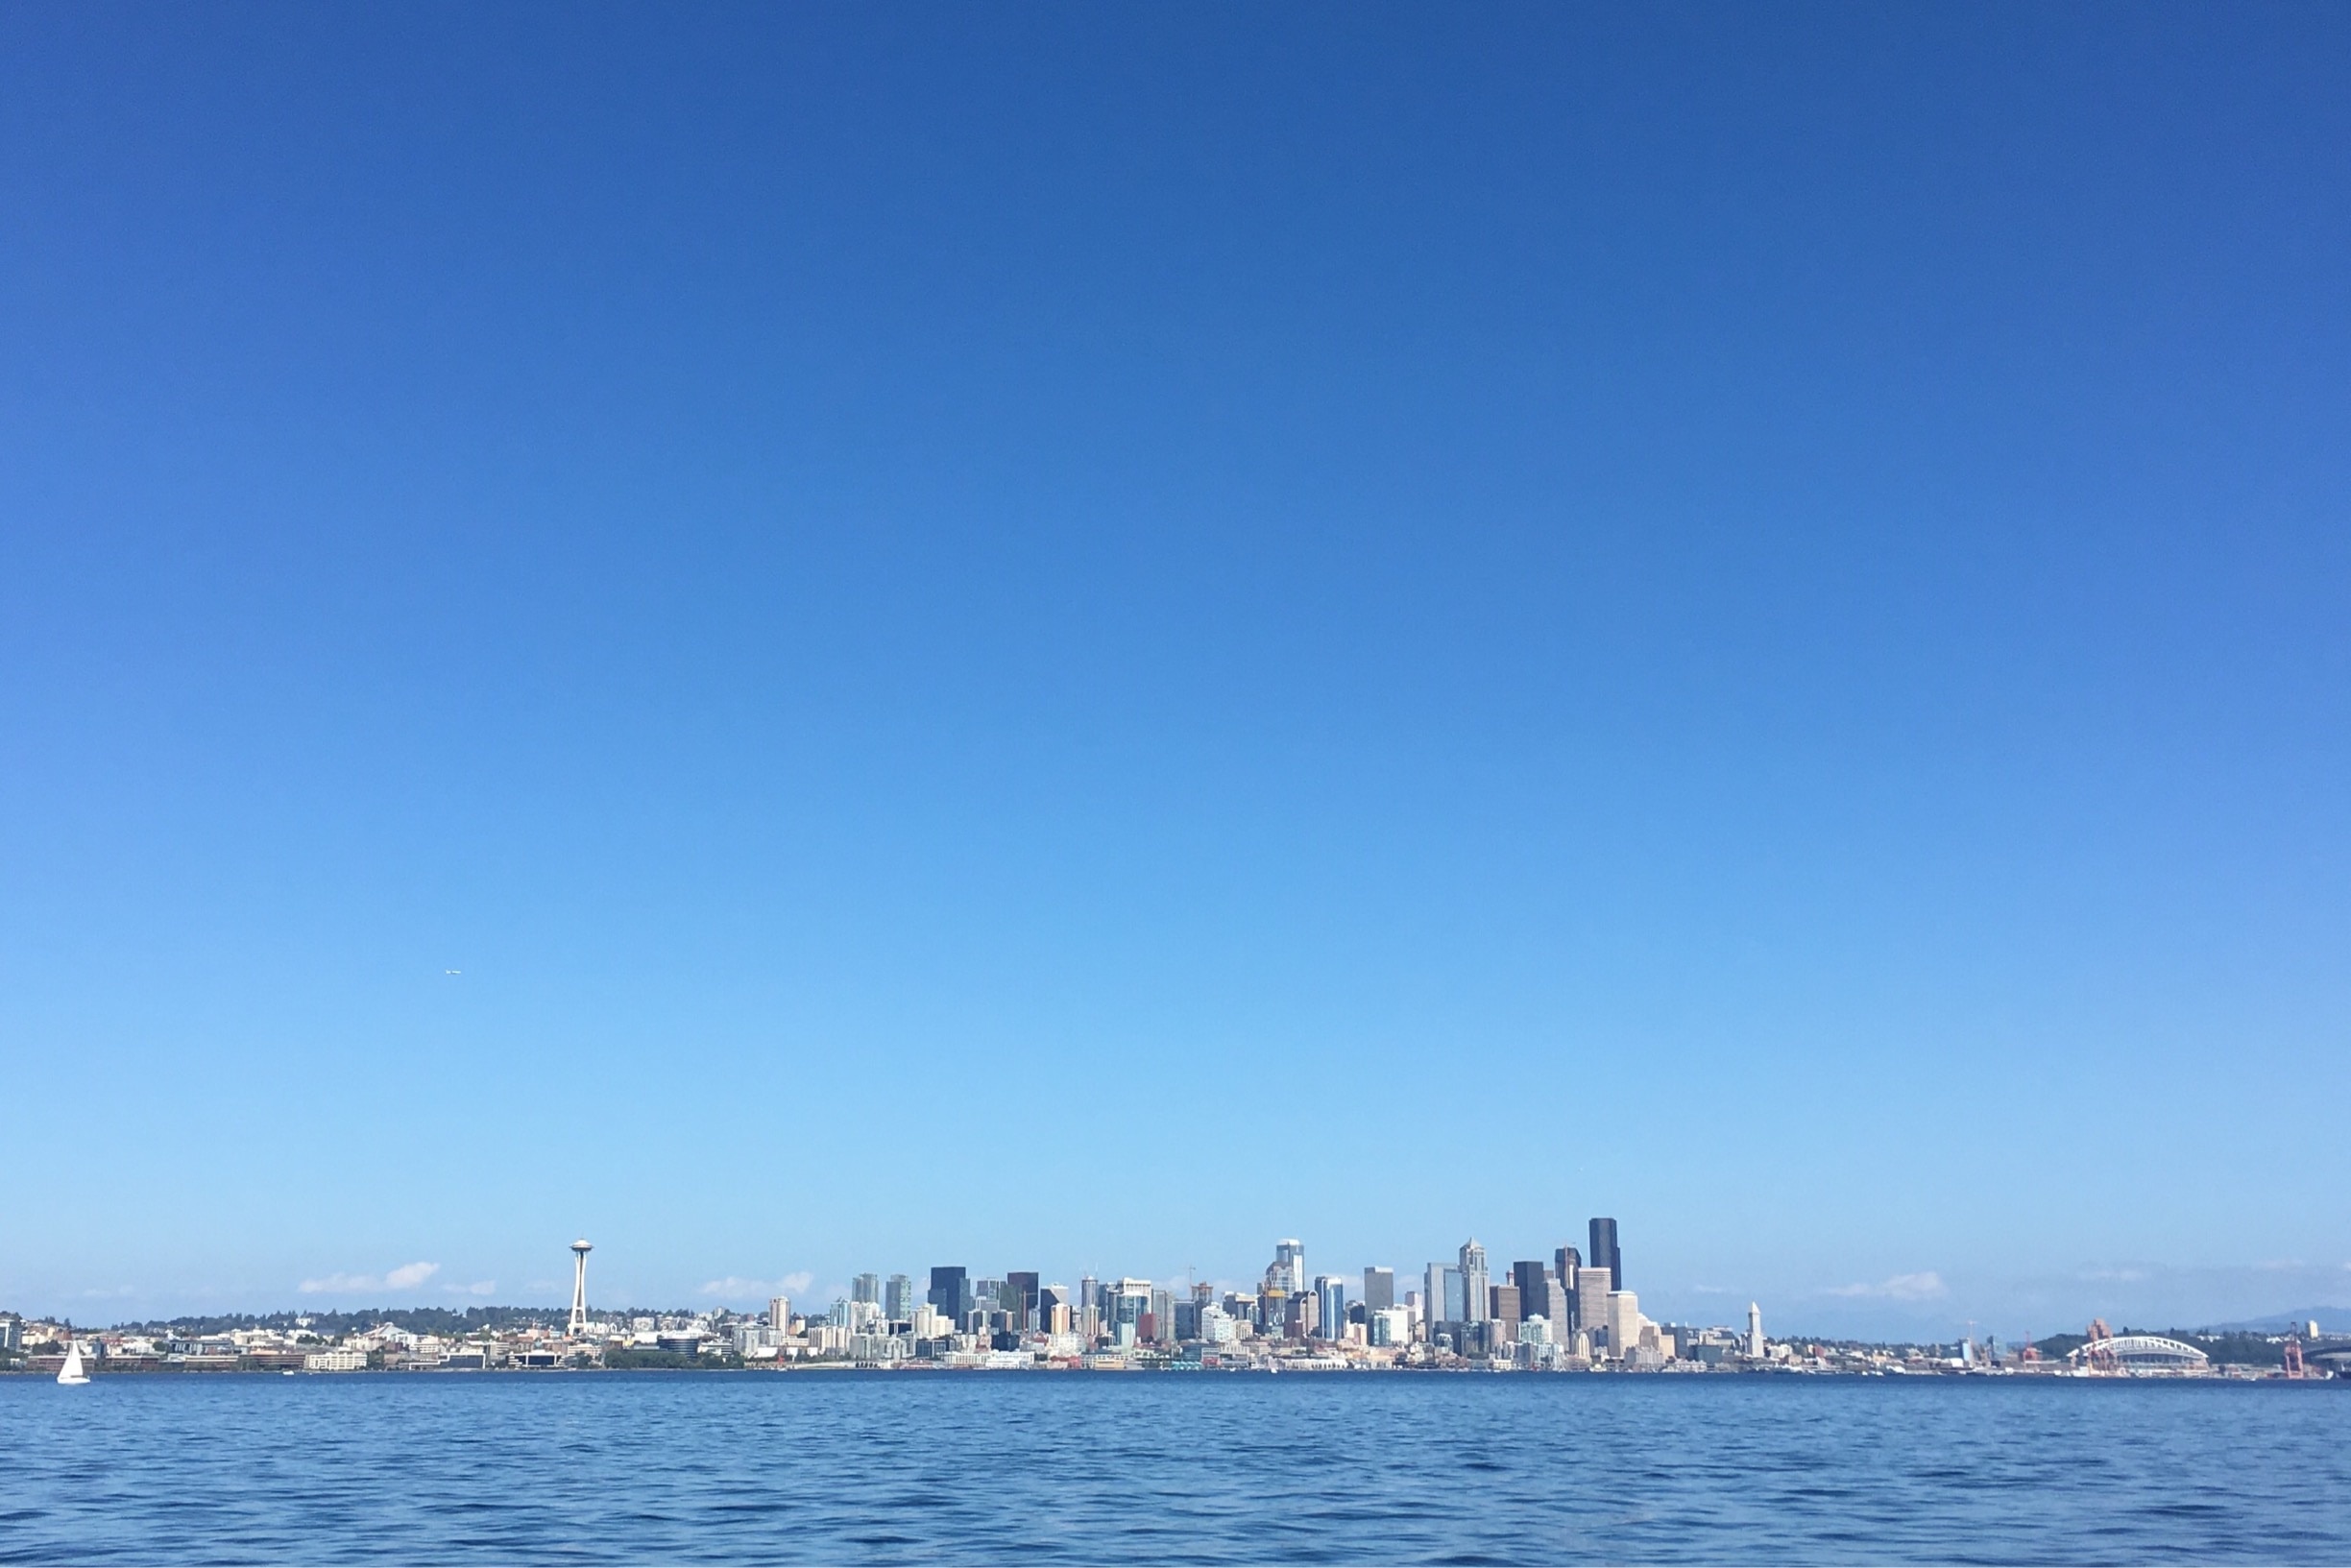 Ever wonder where the Seattle skyline shots come from? Hop a ferry to Bainbridge! Go down below to the car deck to get the best eye-level spot. And while you're on the island check out the tiny town of Winslow!